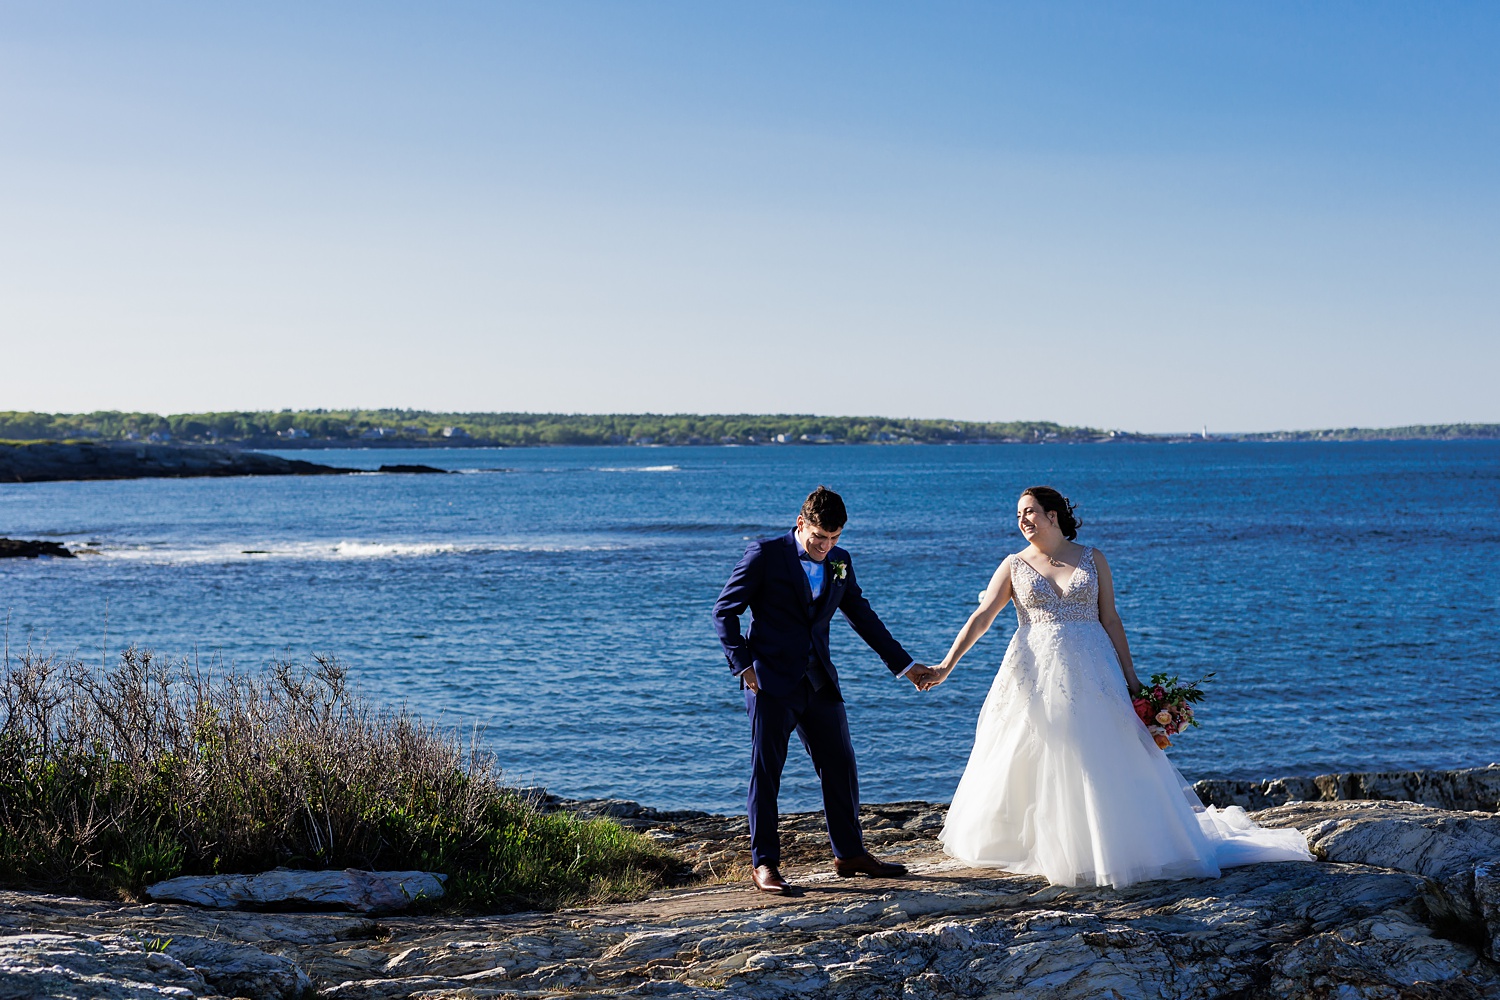 Bride and groom laugh and hold hands with Portland Maine and the ocean in the background